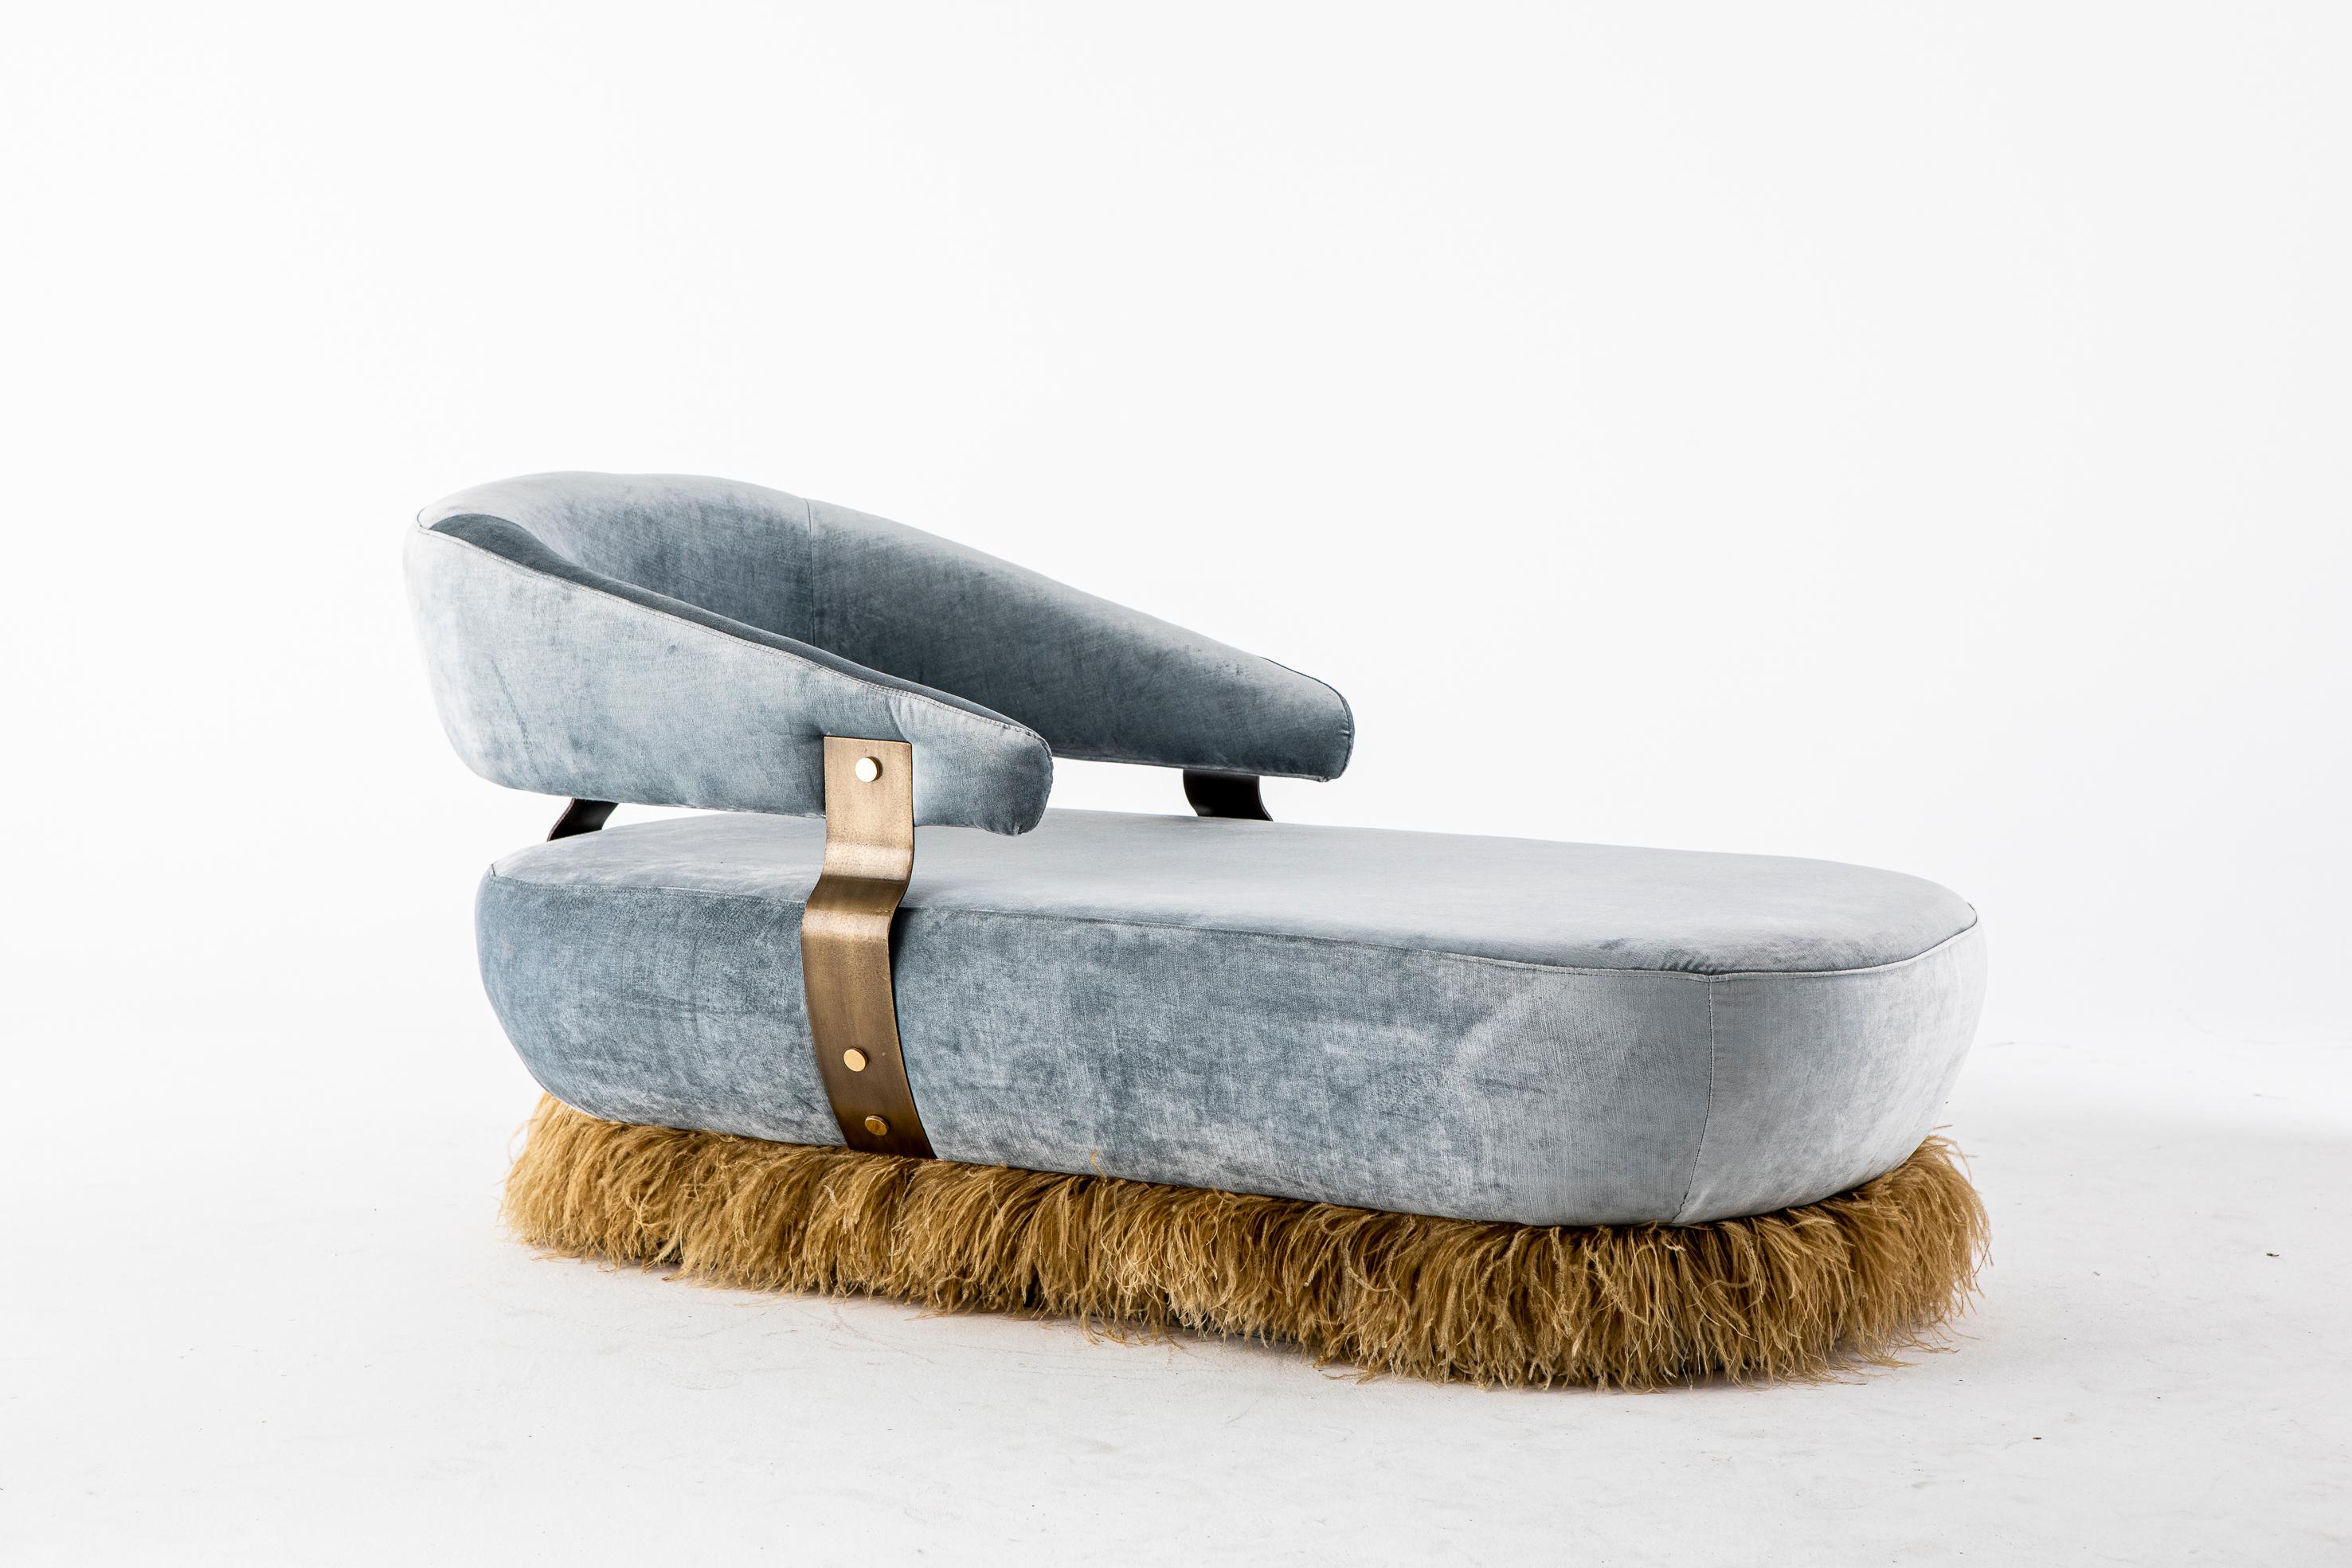 Large Ostrich Fluff Daybed by Egg Designs
Dimensions: 165 L X 79 D X 85 H cm
Materials: Bronze Coated Steel, Brass, Ostrich Feather Trim, Velvet Upholstery

Founded by South Africans and life partners, Greg and Roche Dry - Egg is a unique